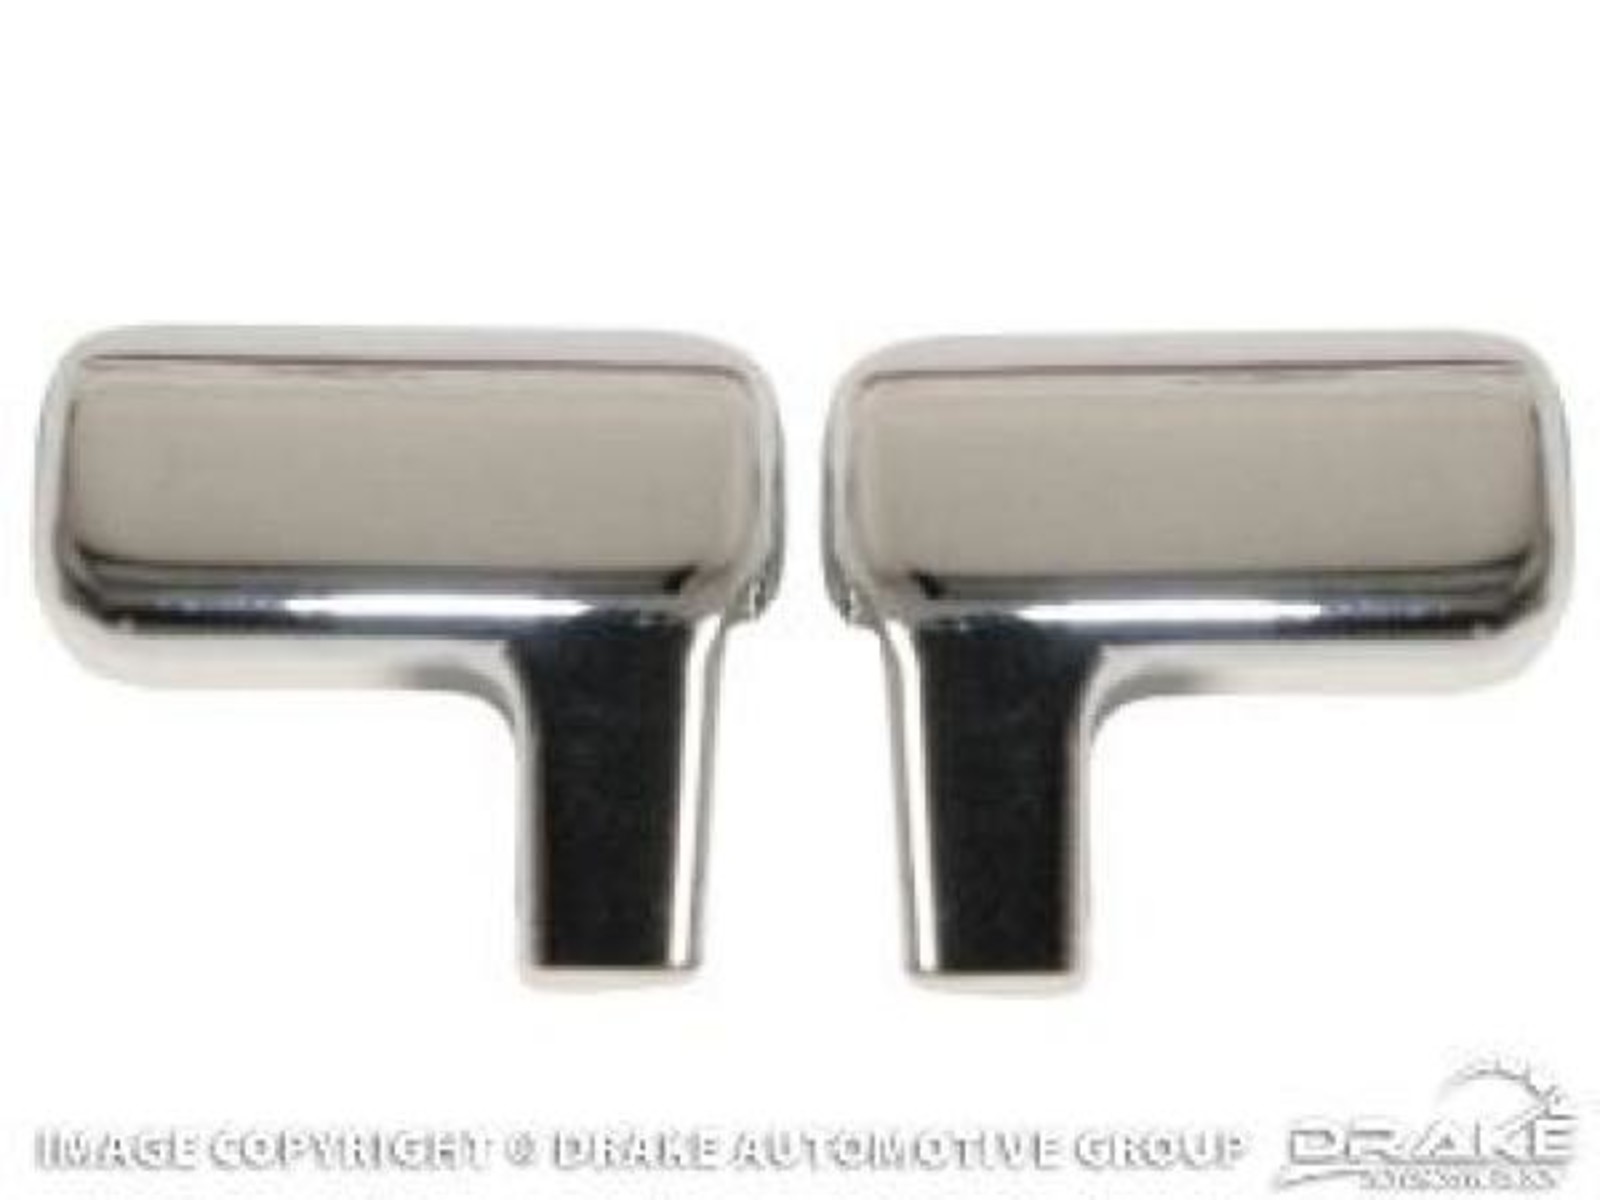 71 Seat Release Knobs